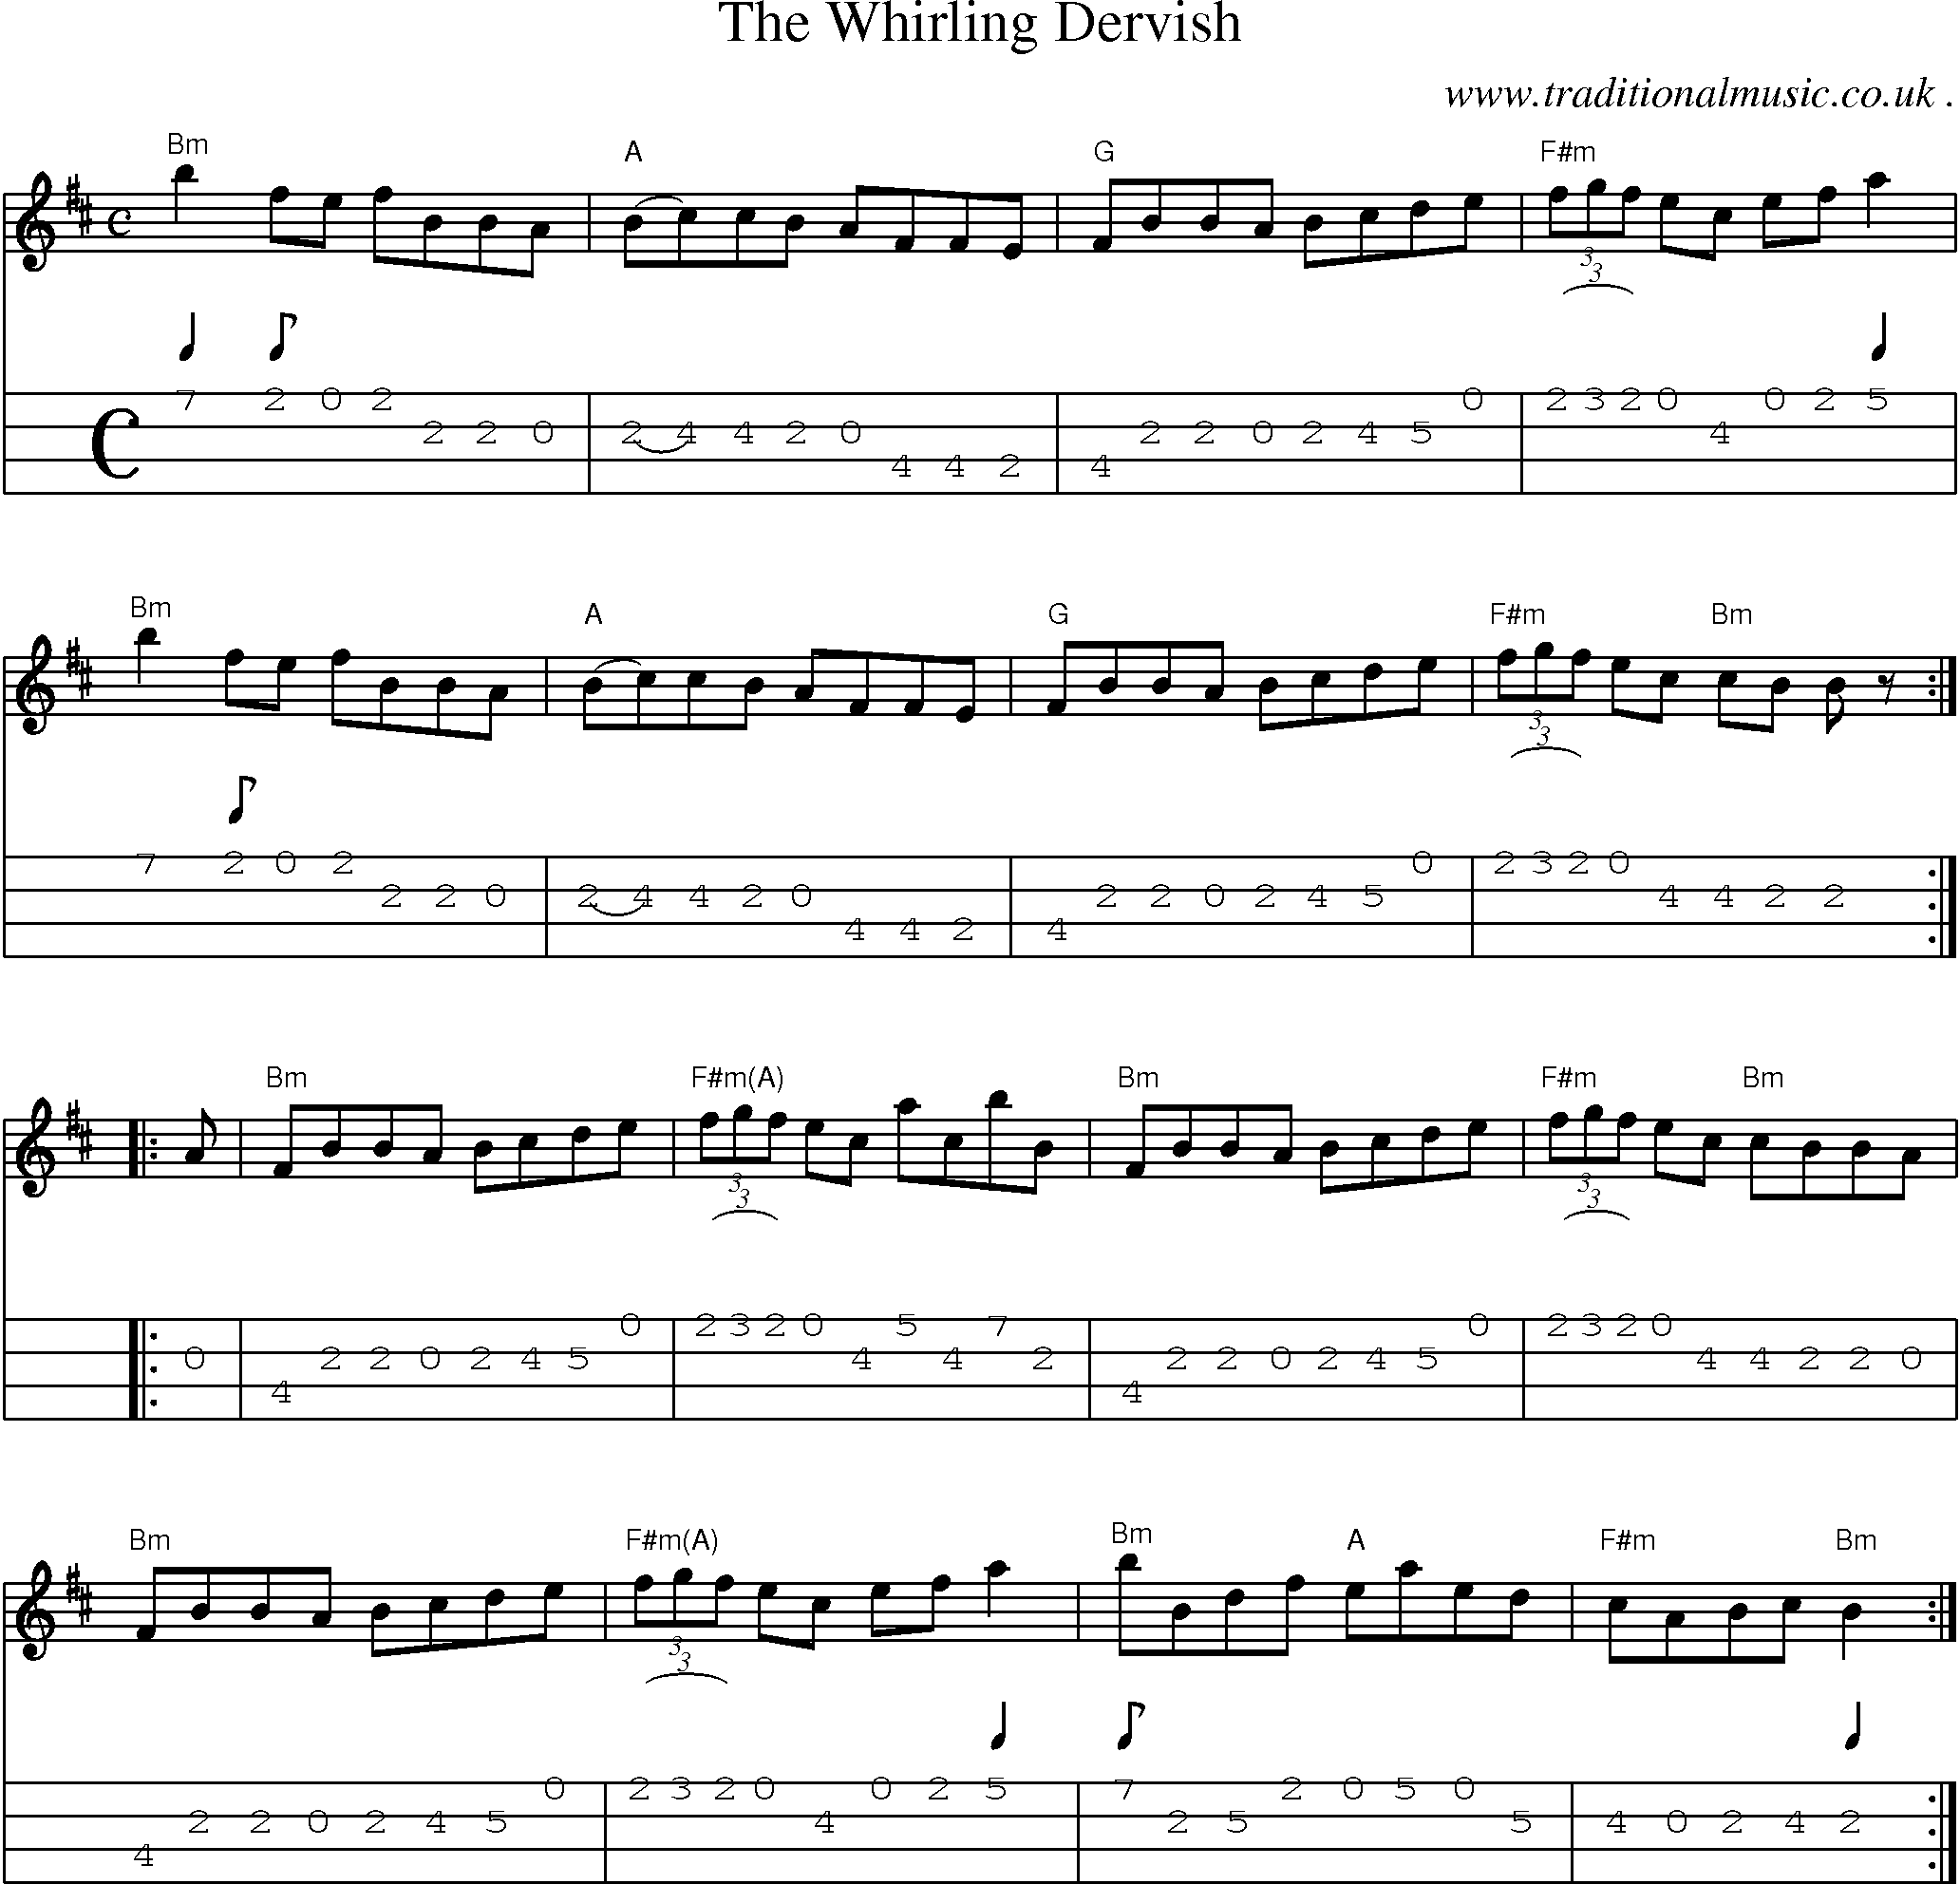 Music Score and Guitar Tabs for The Whirling Dervish